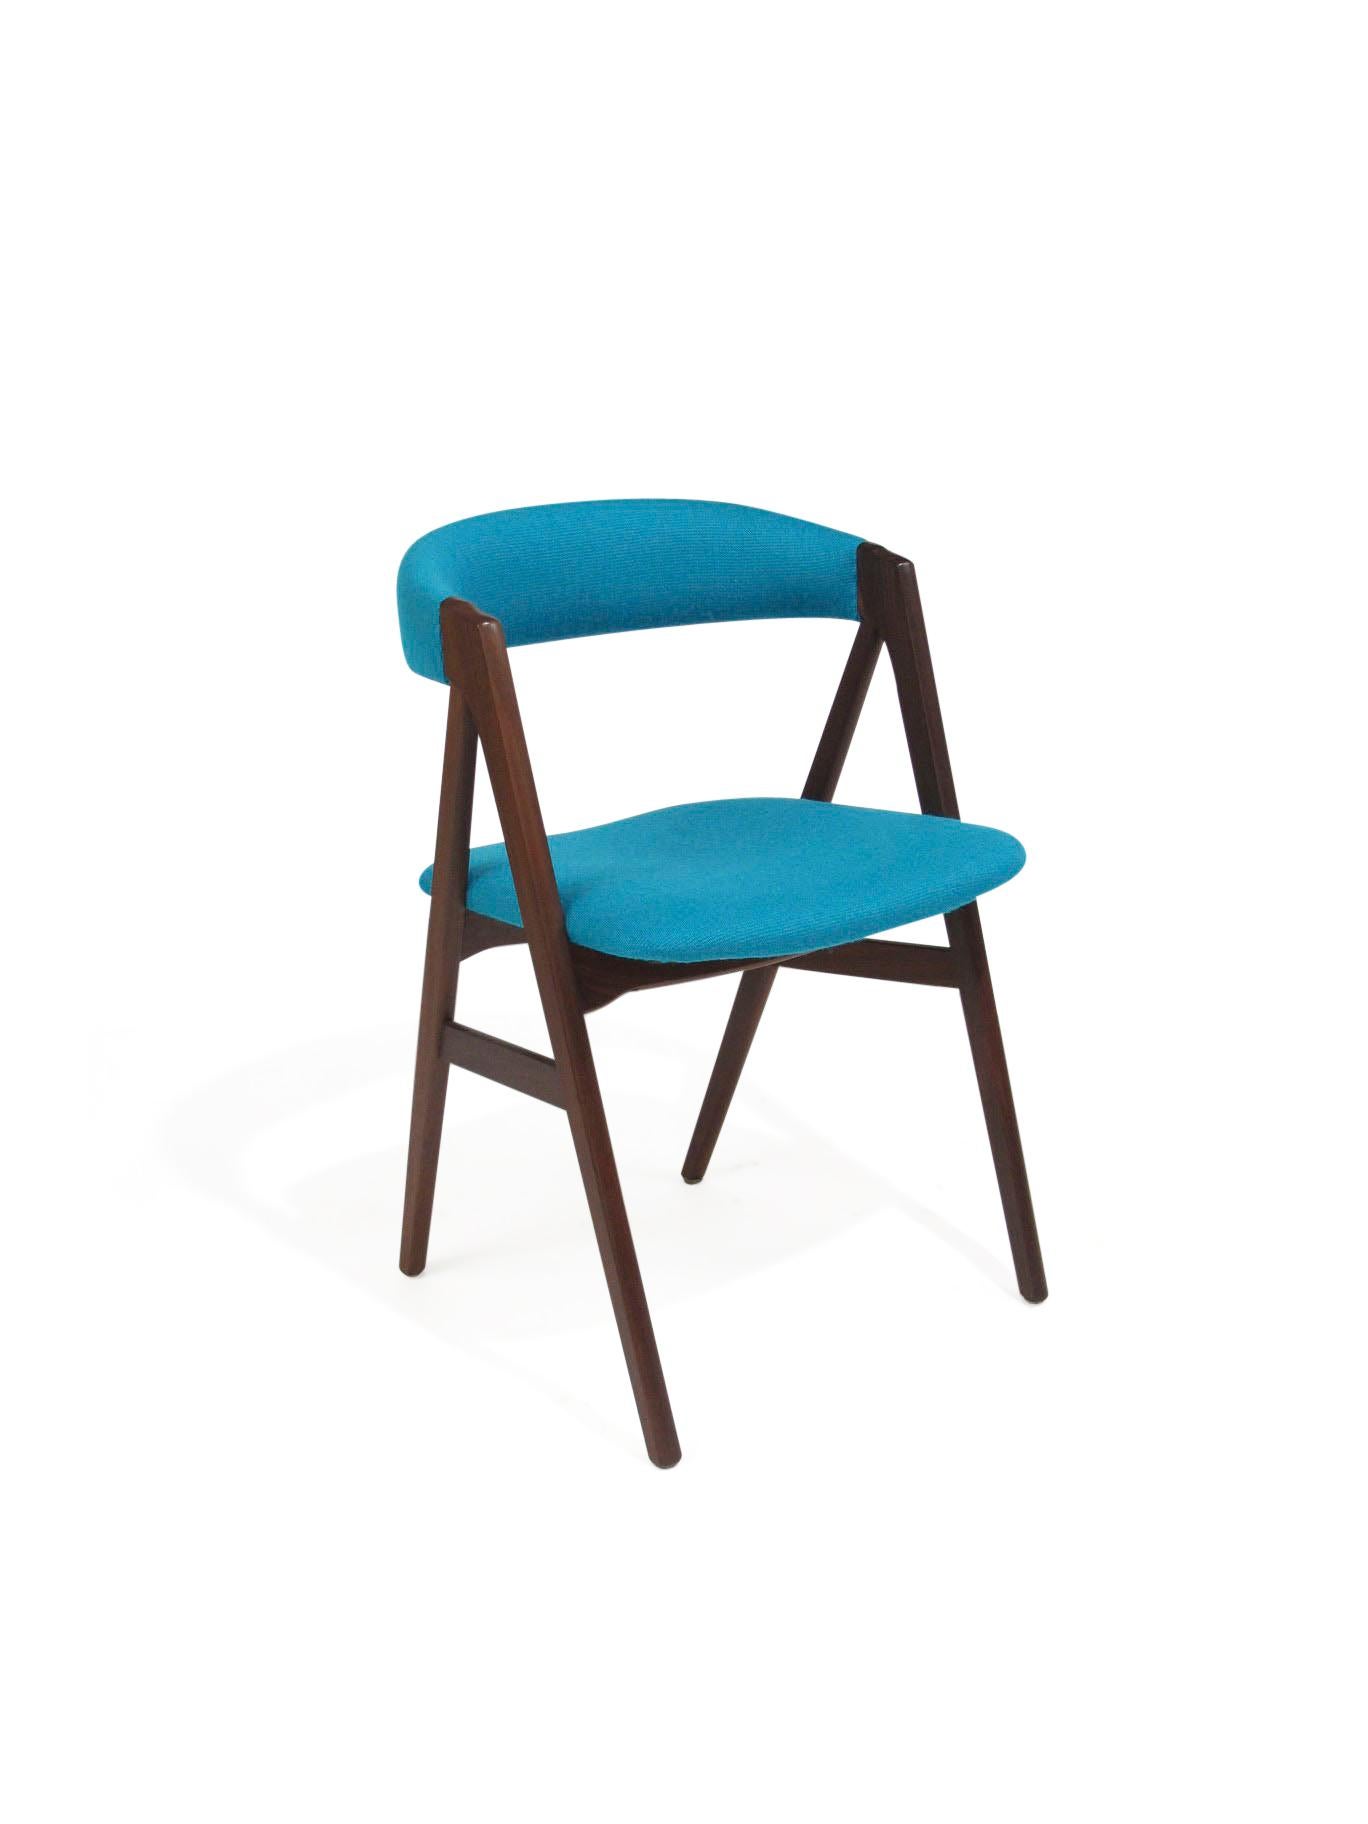 Teak A-Frame Danish Dining Chairs in Turquoise Wool